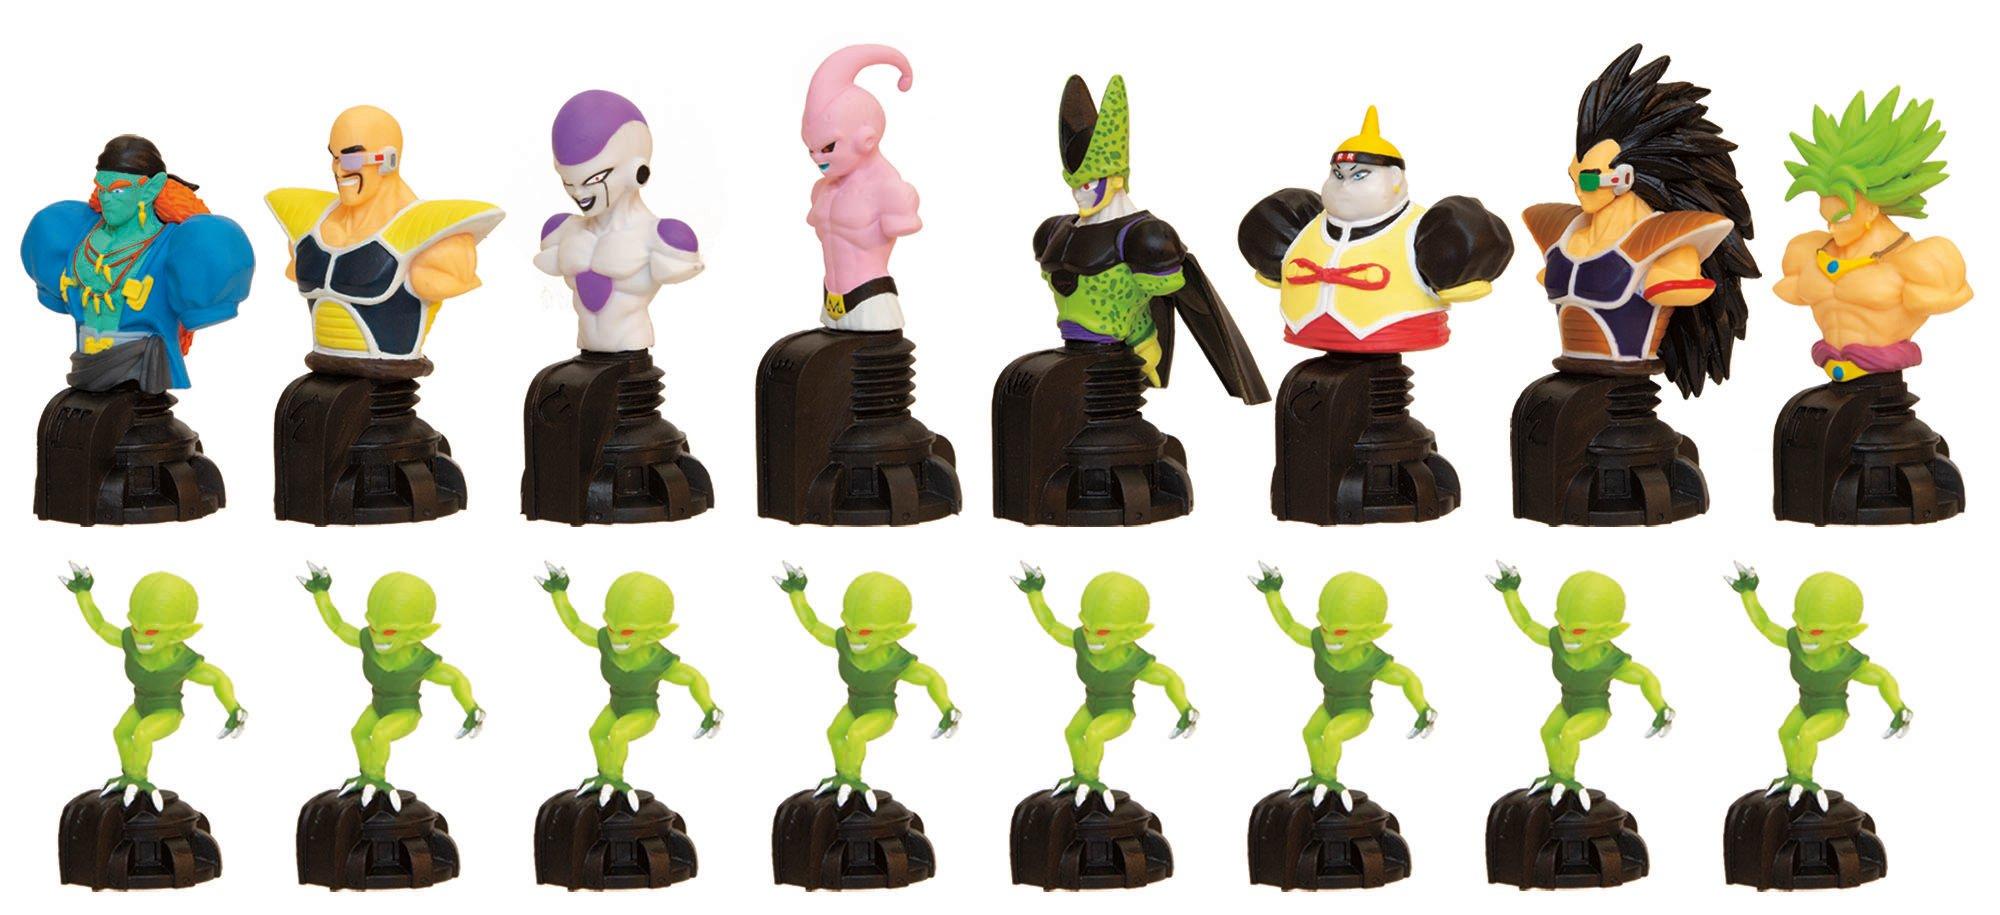 Dragon Ball Z Collector S Chess Set Only At Gamestop Gamestop